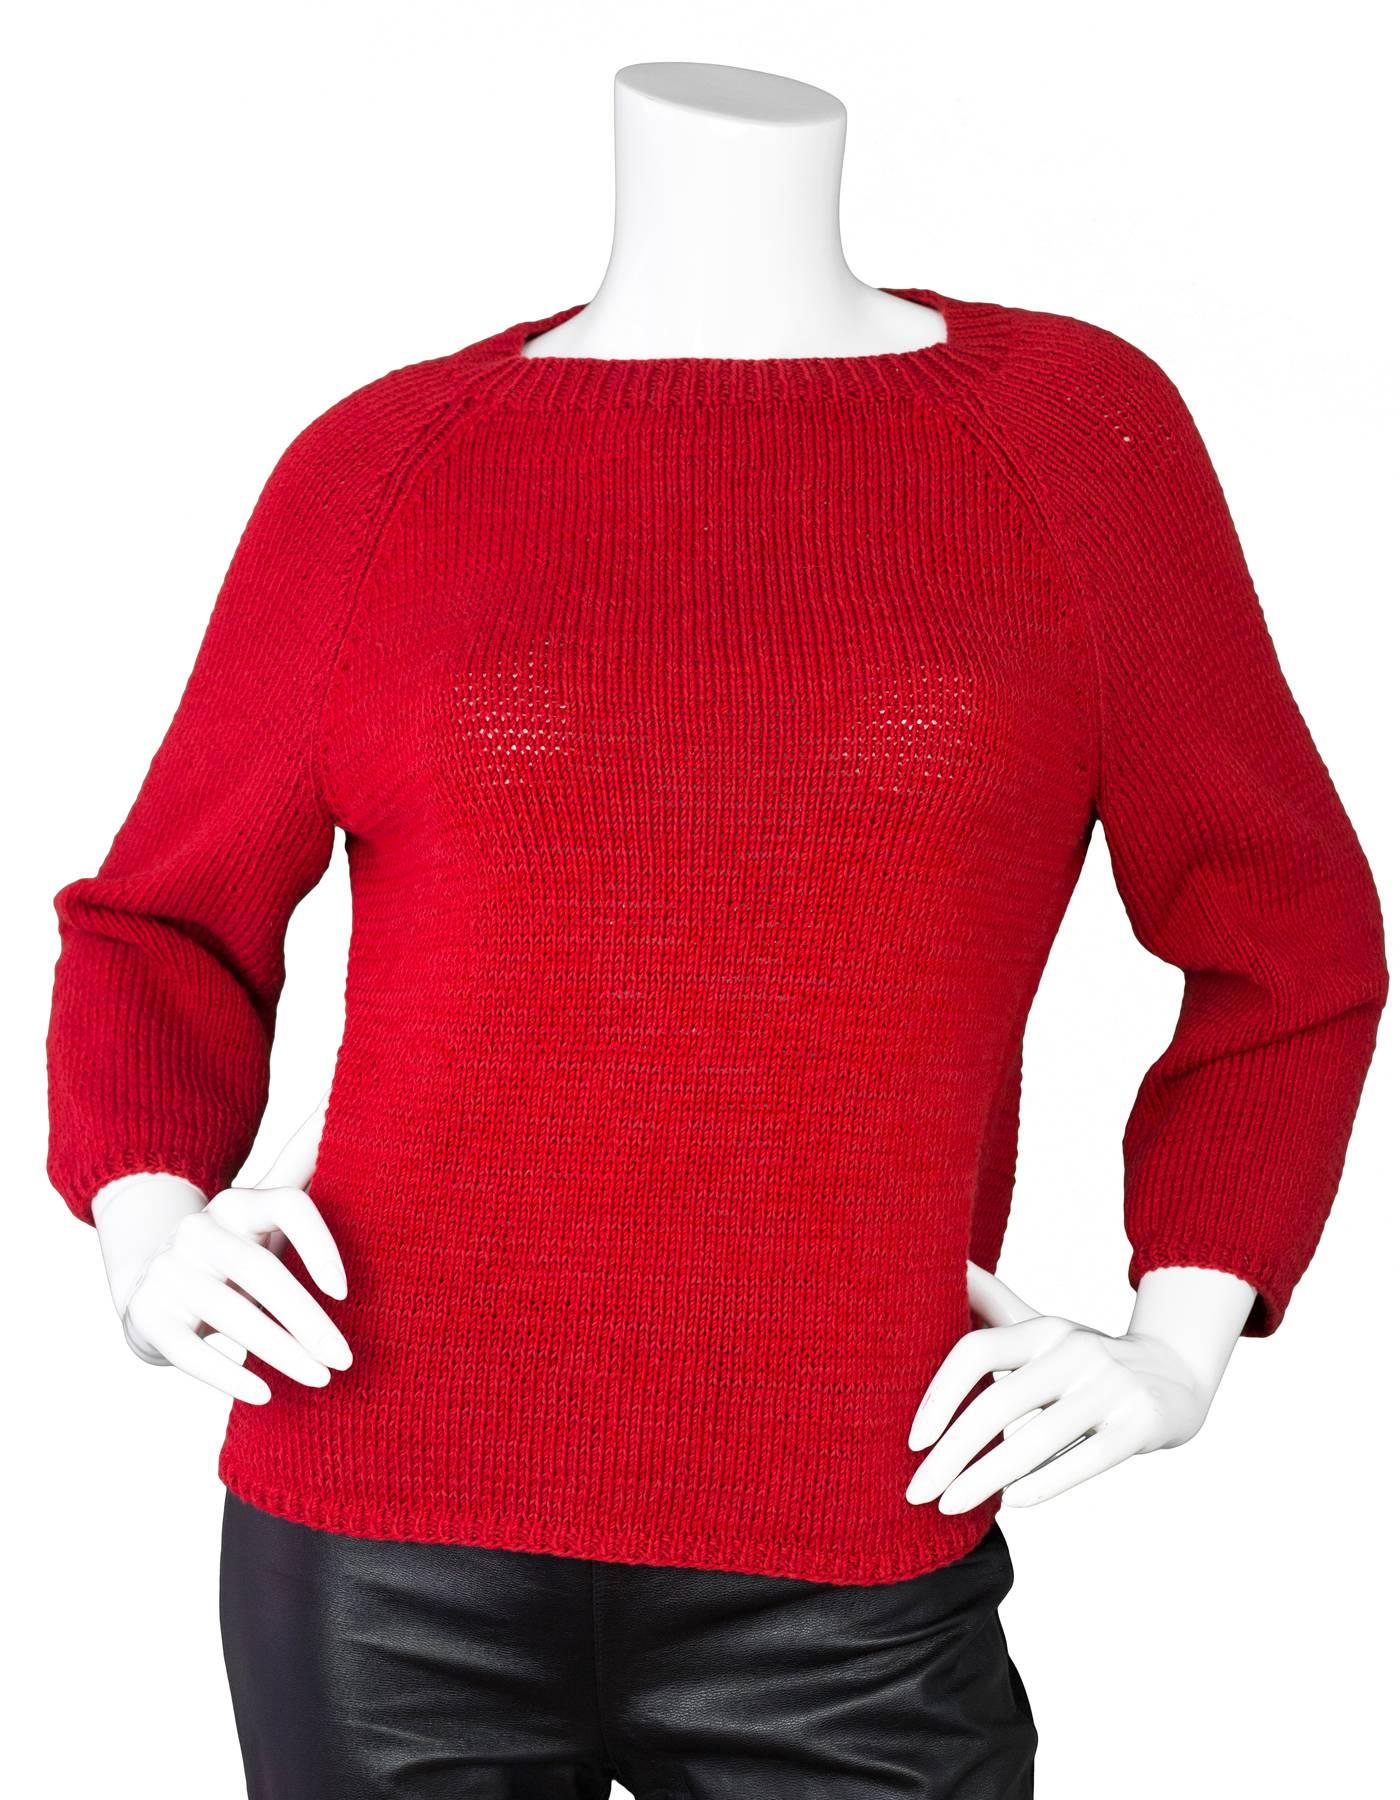 Oscar De La Renta Red Longsleeve Sweater Sz Small

Made In: Russia
Color: Red
Composition: 100% Cotton
Lining: None
Closure/Opening: Pull over
Exterior Pockets: None
Interior Pockets: None
Overall Condition: Excellent pre-owned condition
Marked